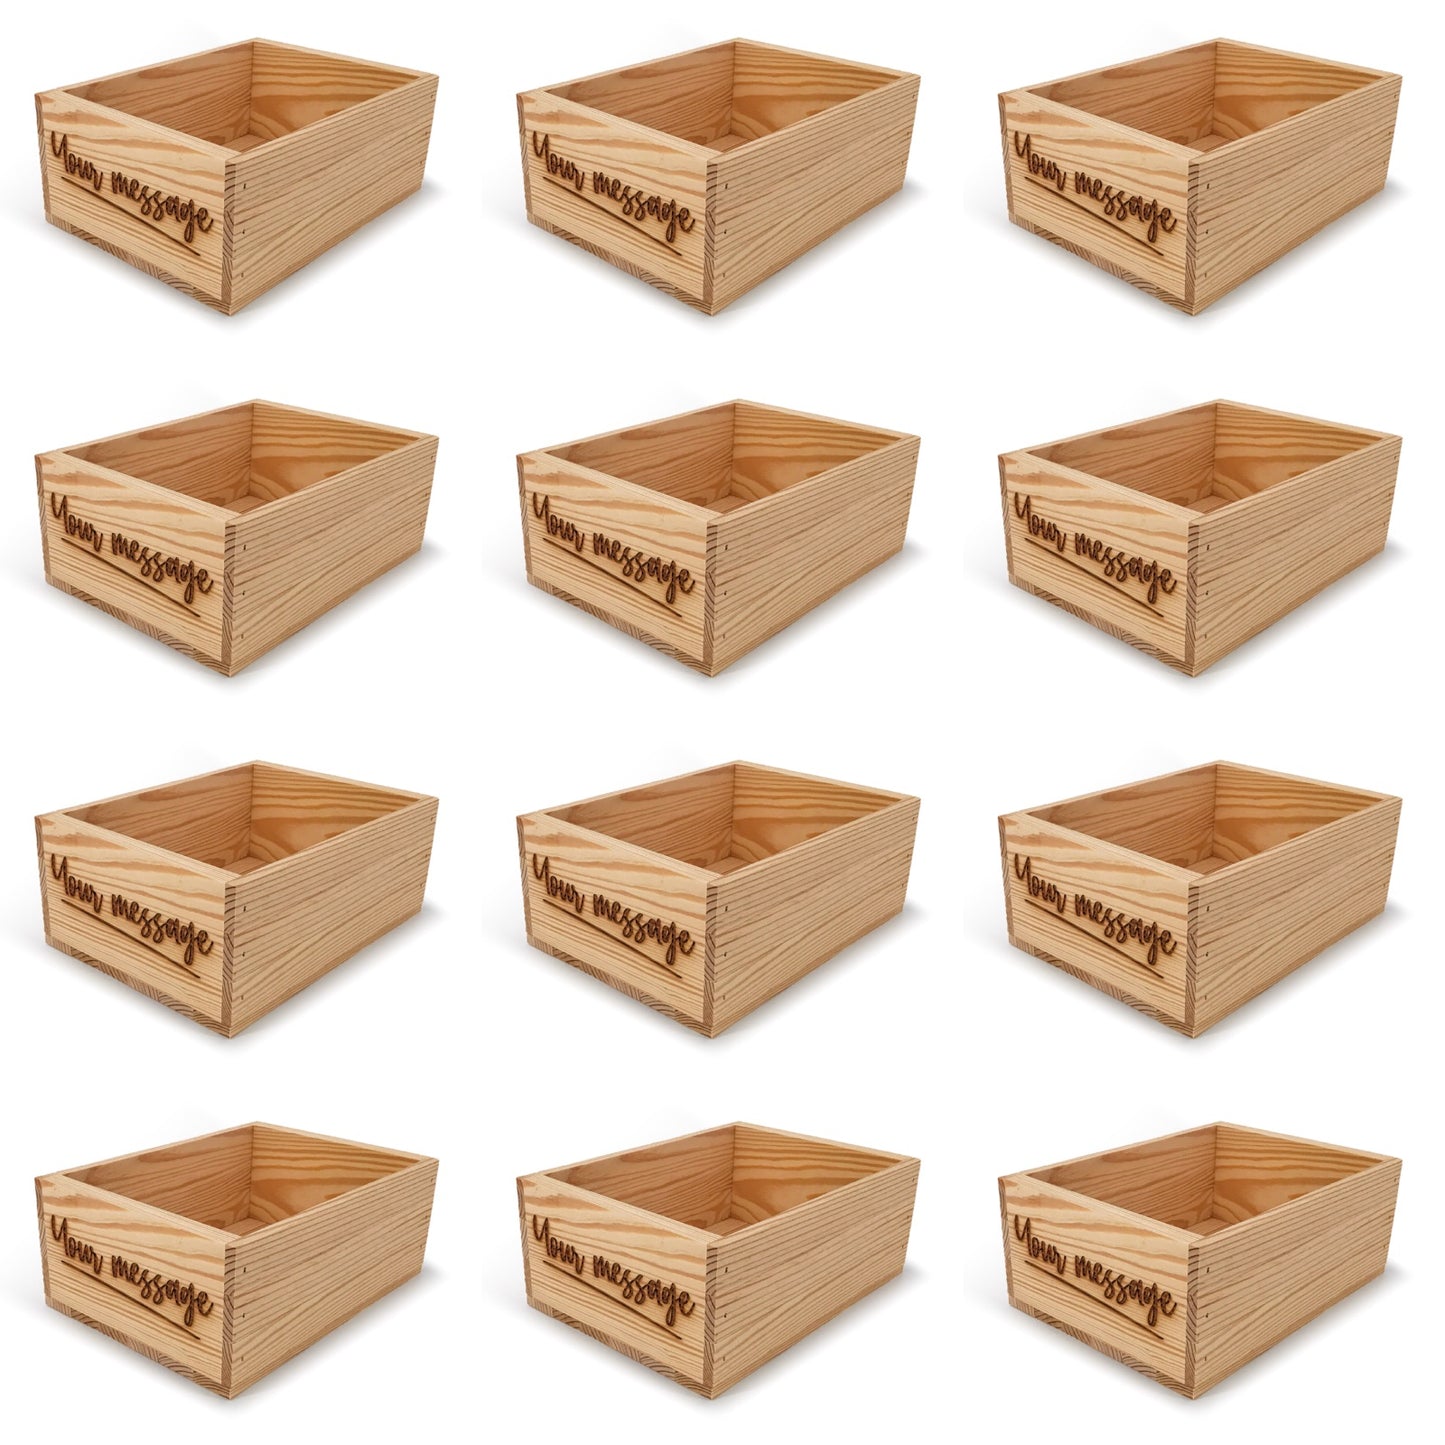 12 Small wooden crates with custom message 10x8x4.25